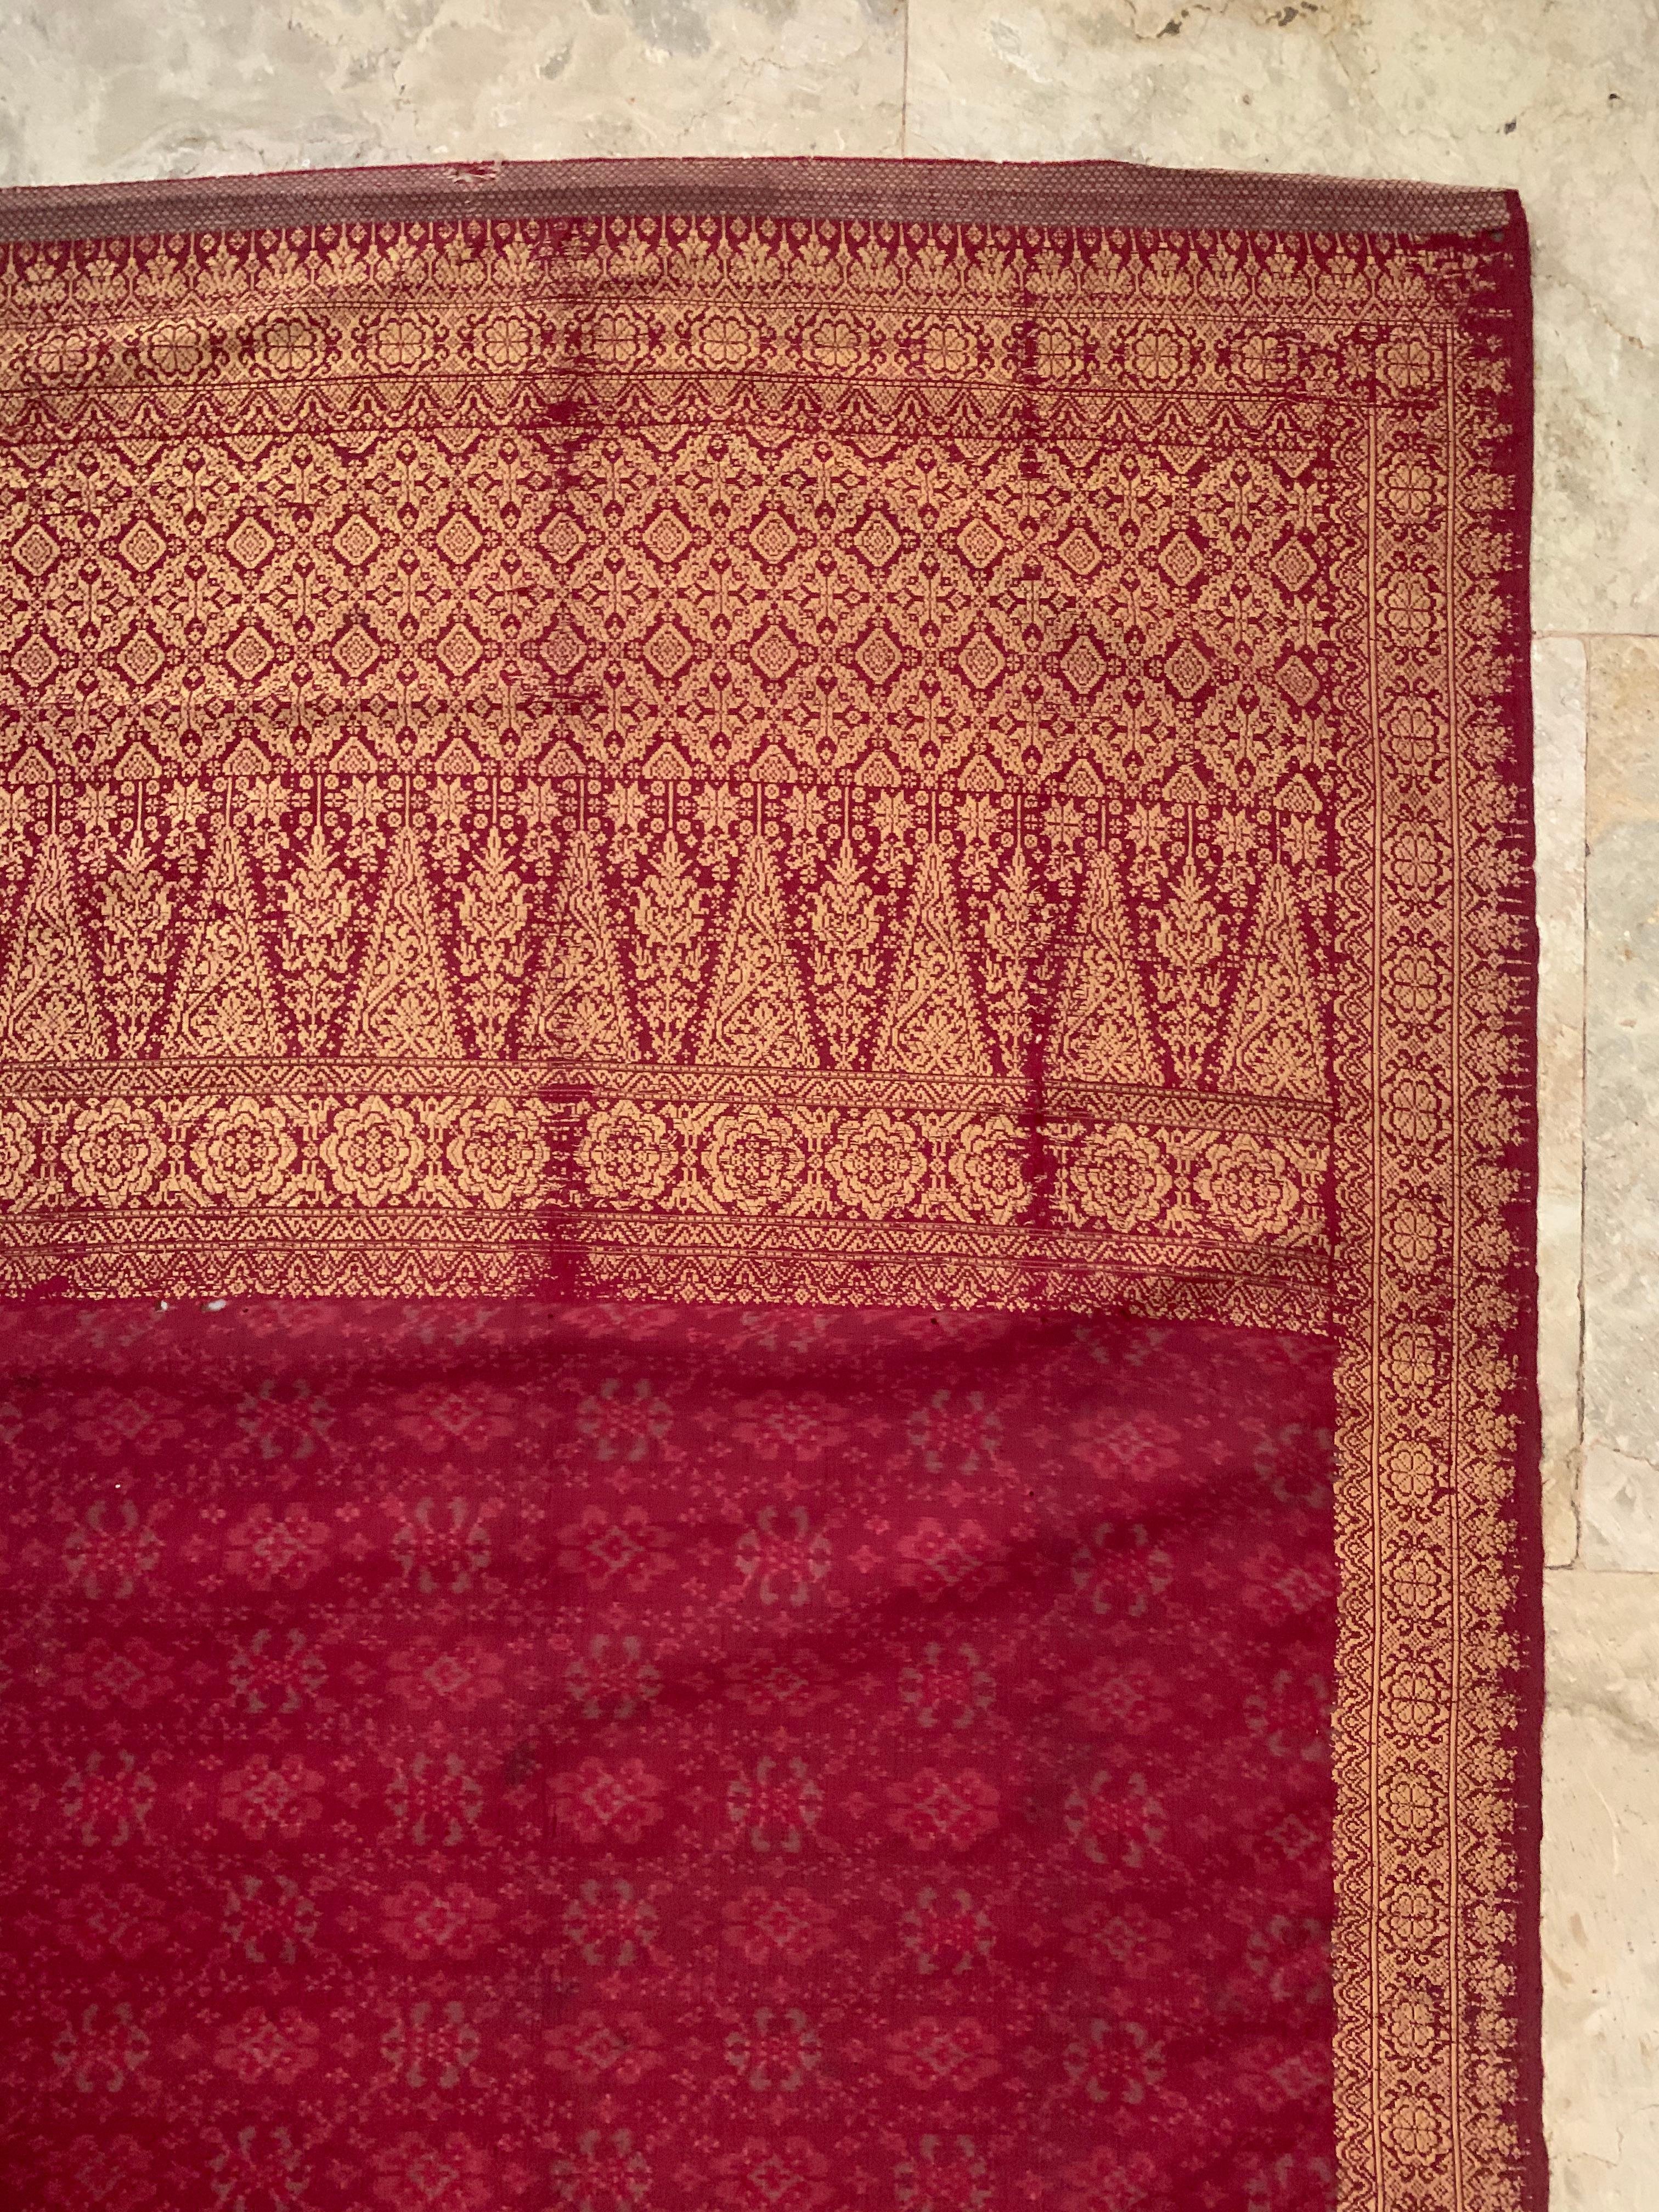 Early 20th Century Ceremonial Silk Ikat from Sumatra with Stunning Motifs and Gold Leaf Detail